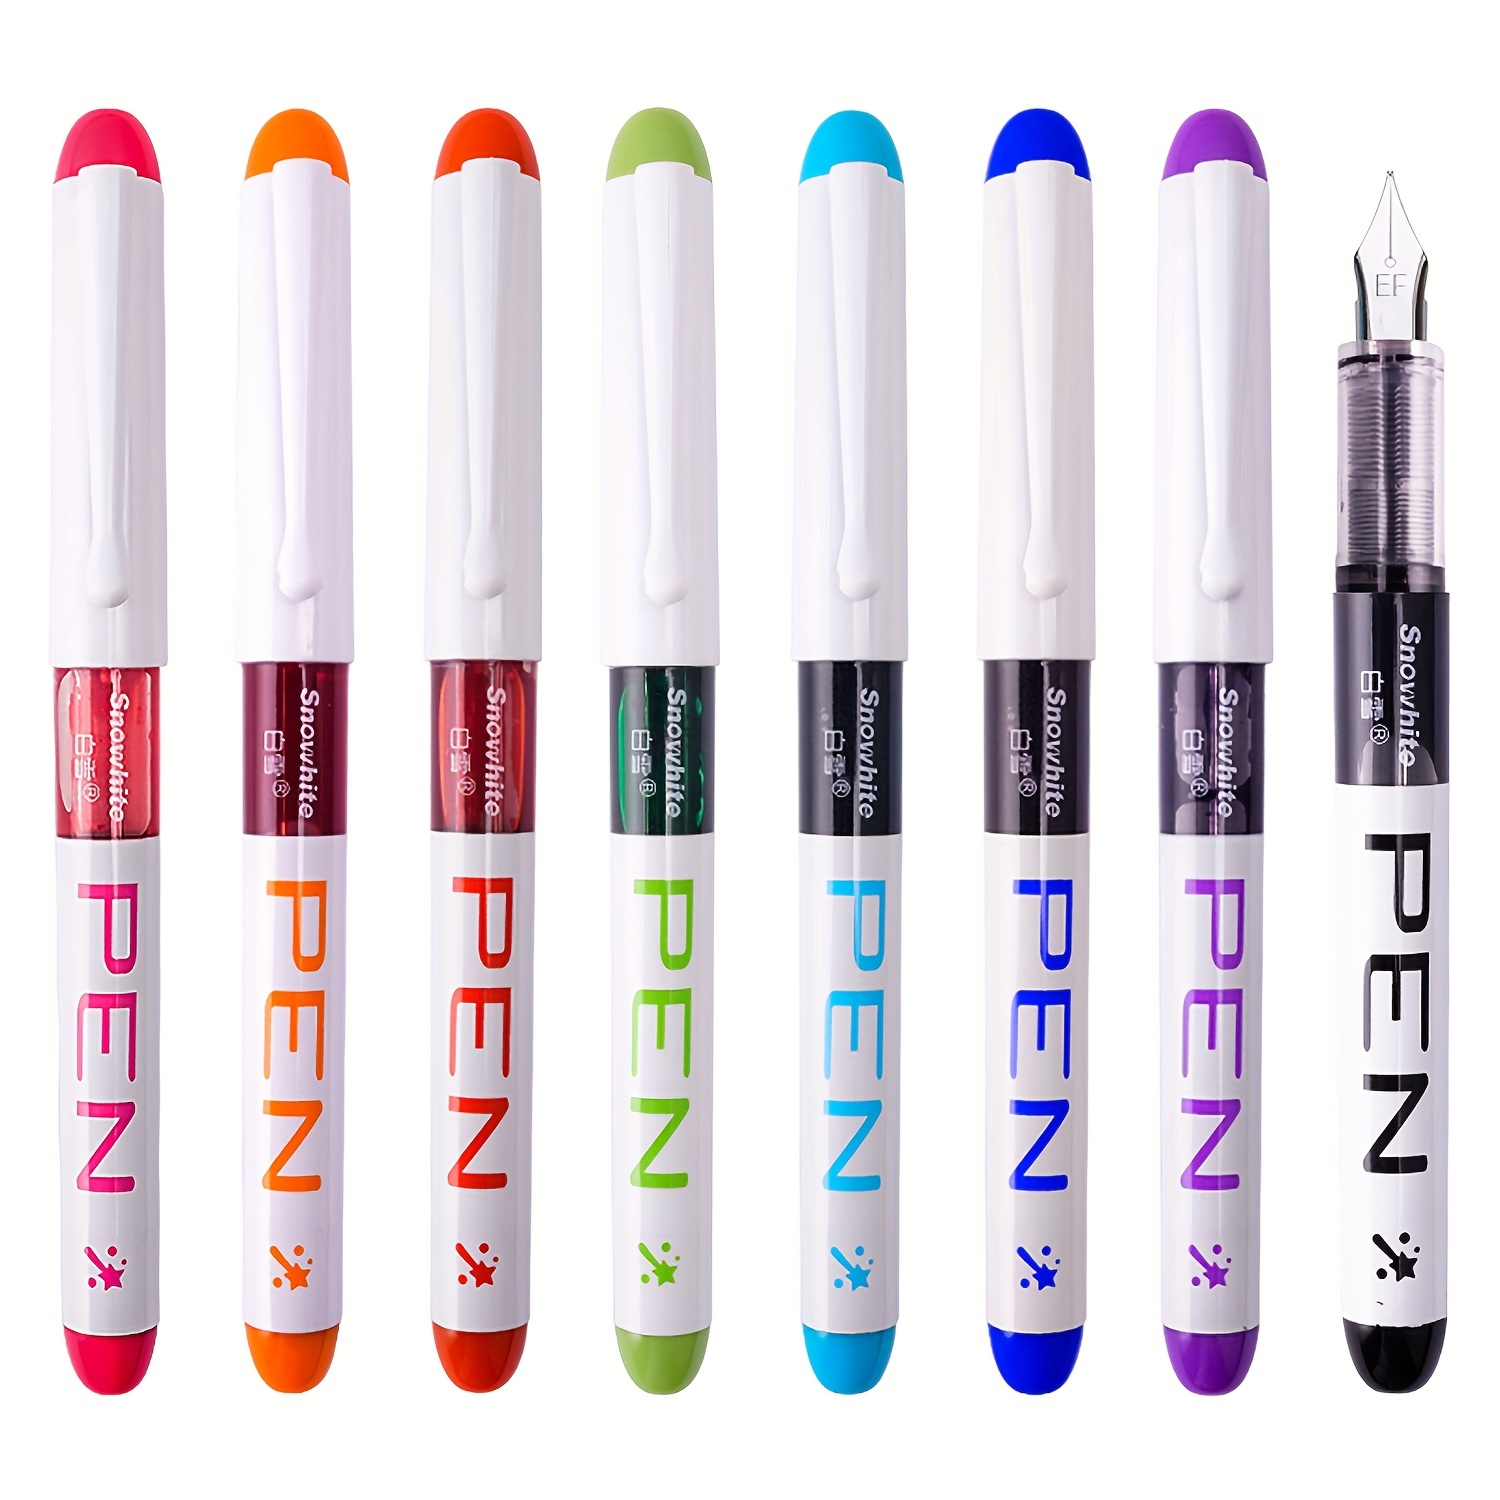 12 Pieces Disposable Fountain Pens, Quick-Drying Ink Pen, Smooth-Writing  Multicolor Art Supplies for Sketching, Journaling, Calligraphy and Doodling